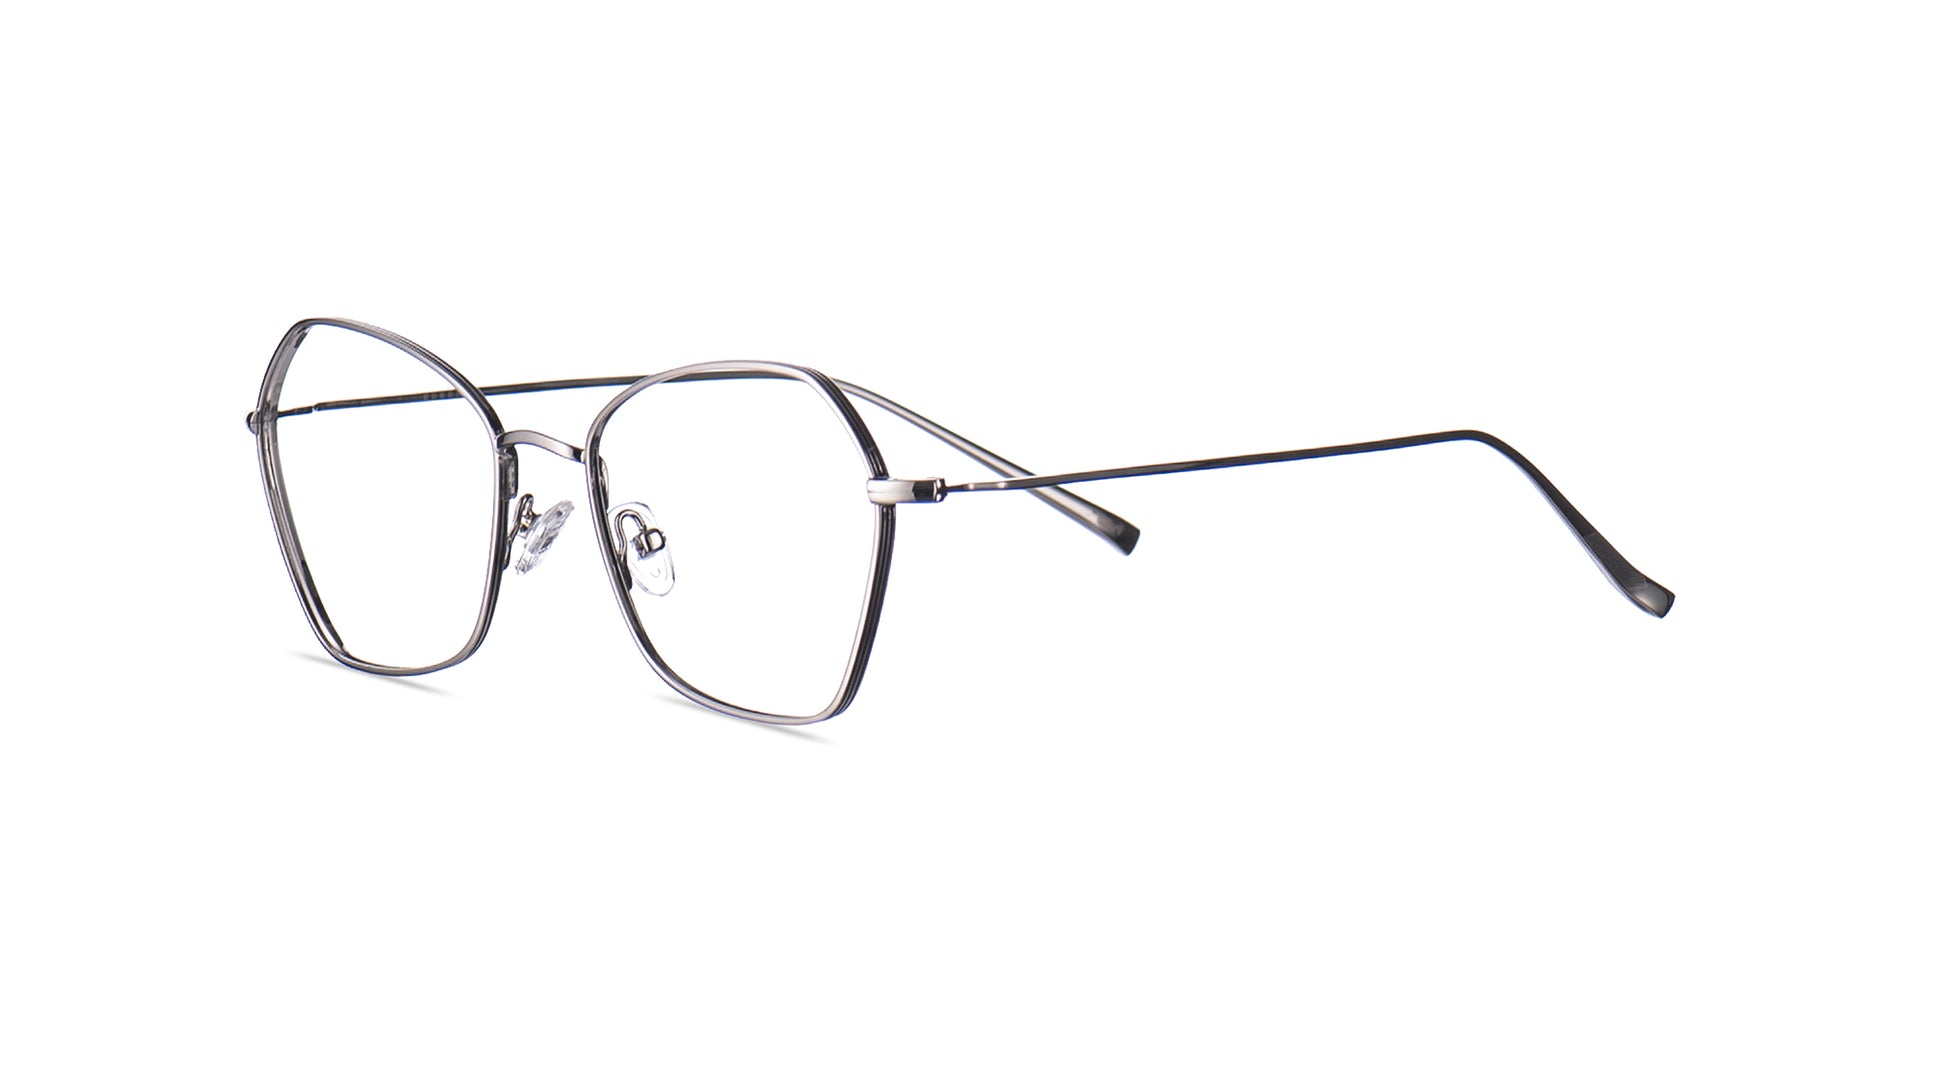 Stainless steel frame, a unique shape that fits a wide range of faces and is very flattering on the wearer.